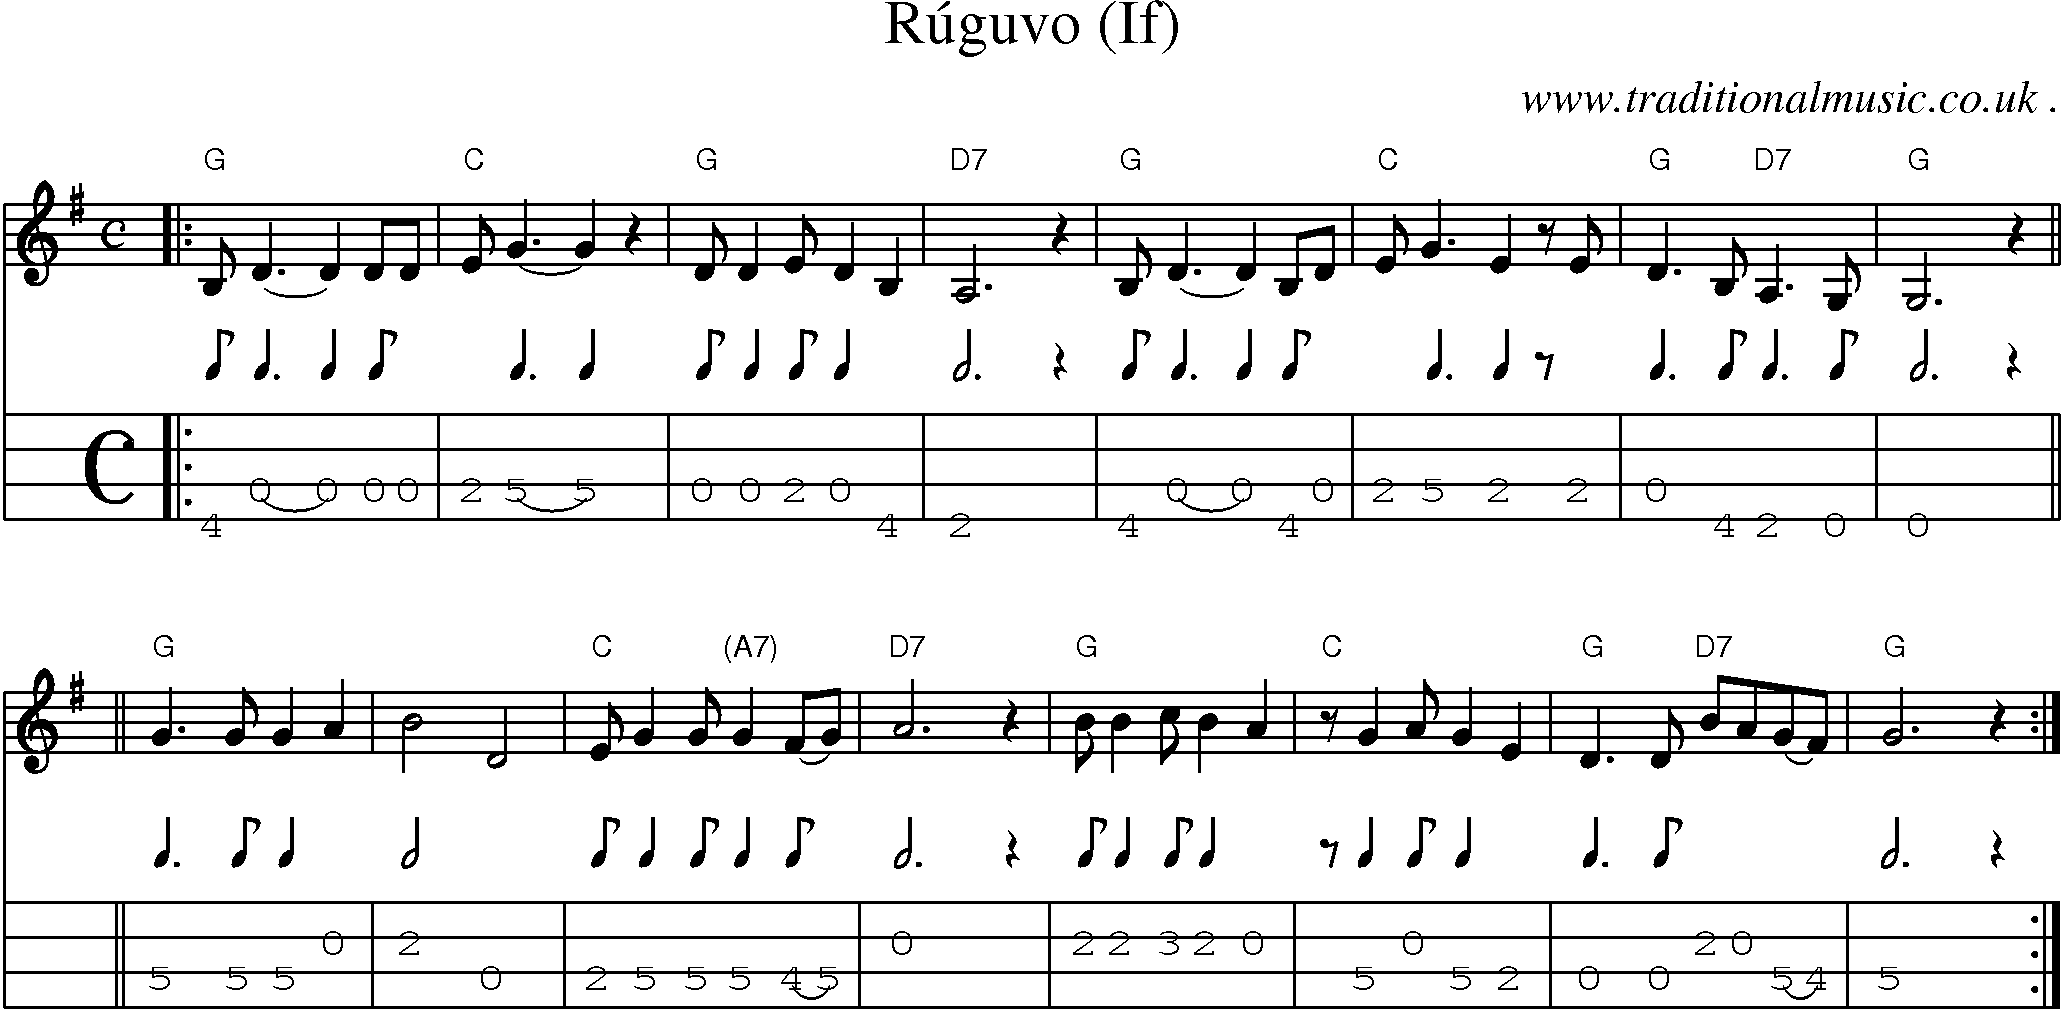 Sheet-music  score, Chords and Mandolin Tabs for Ruguvo If